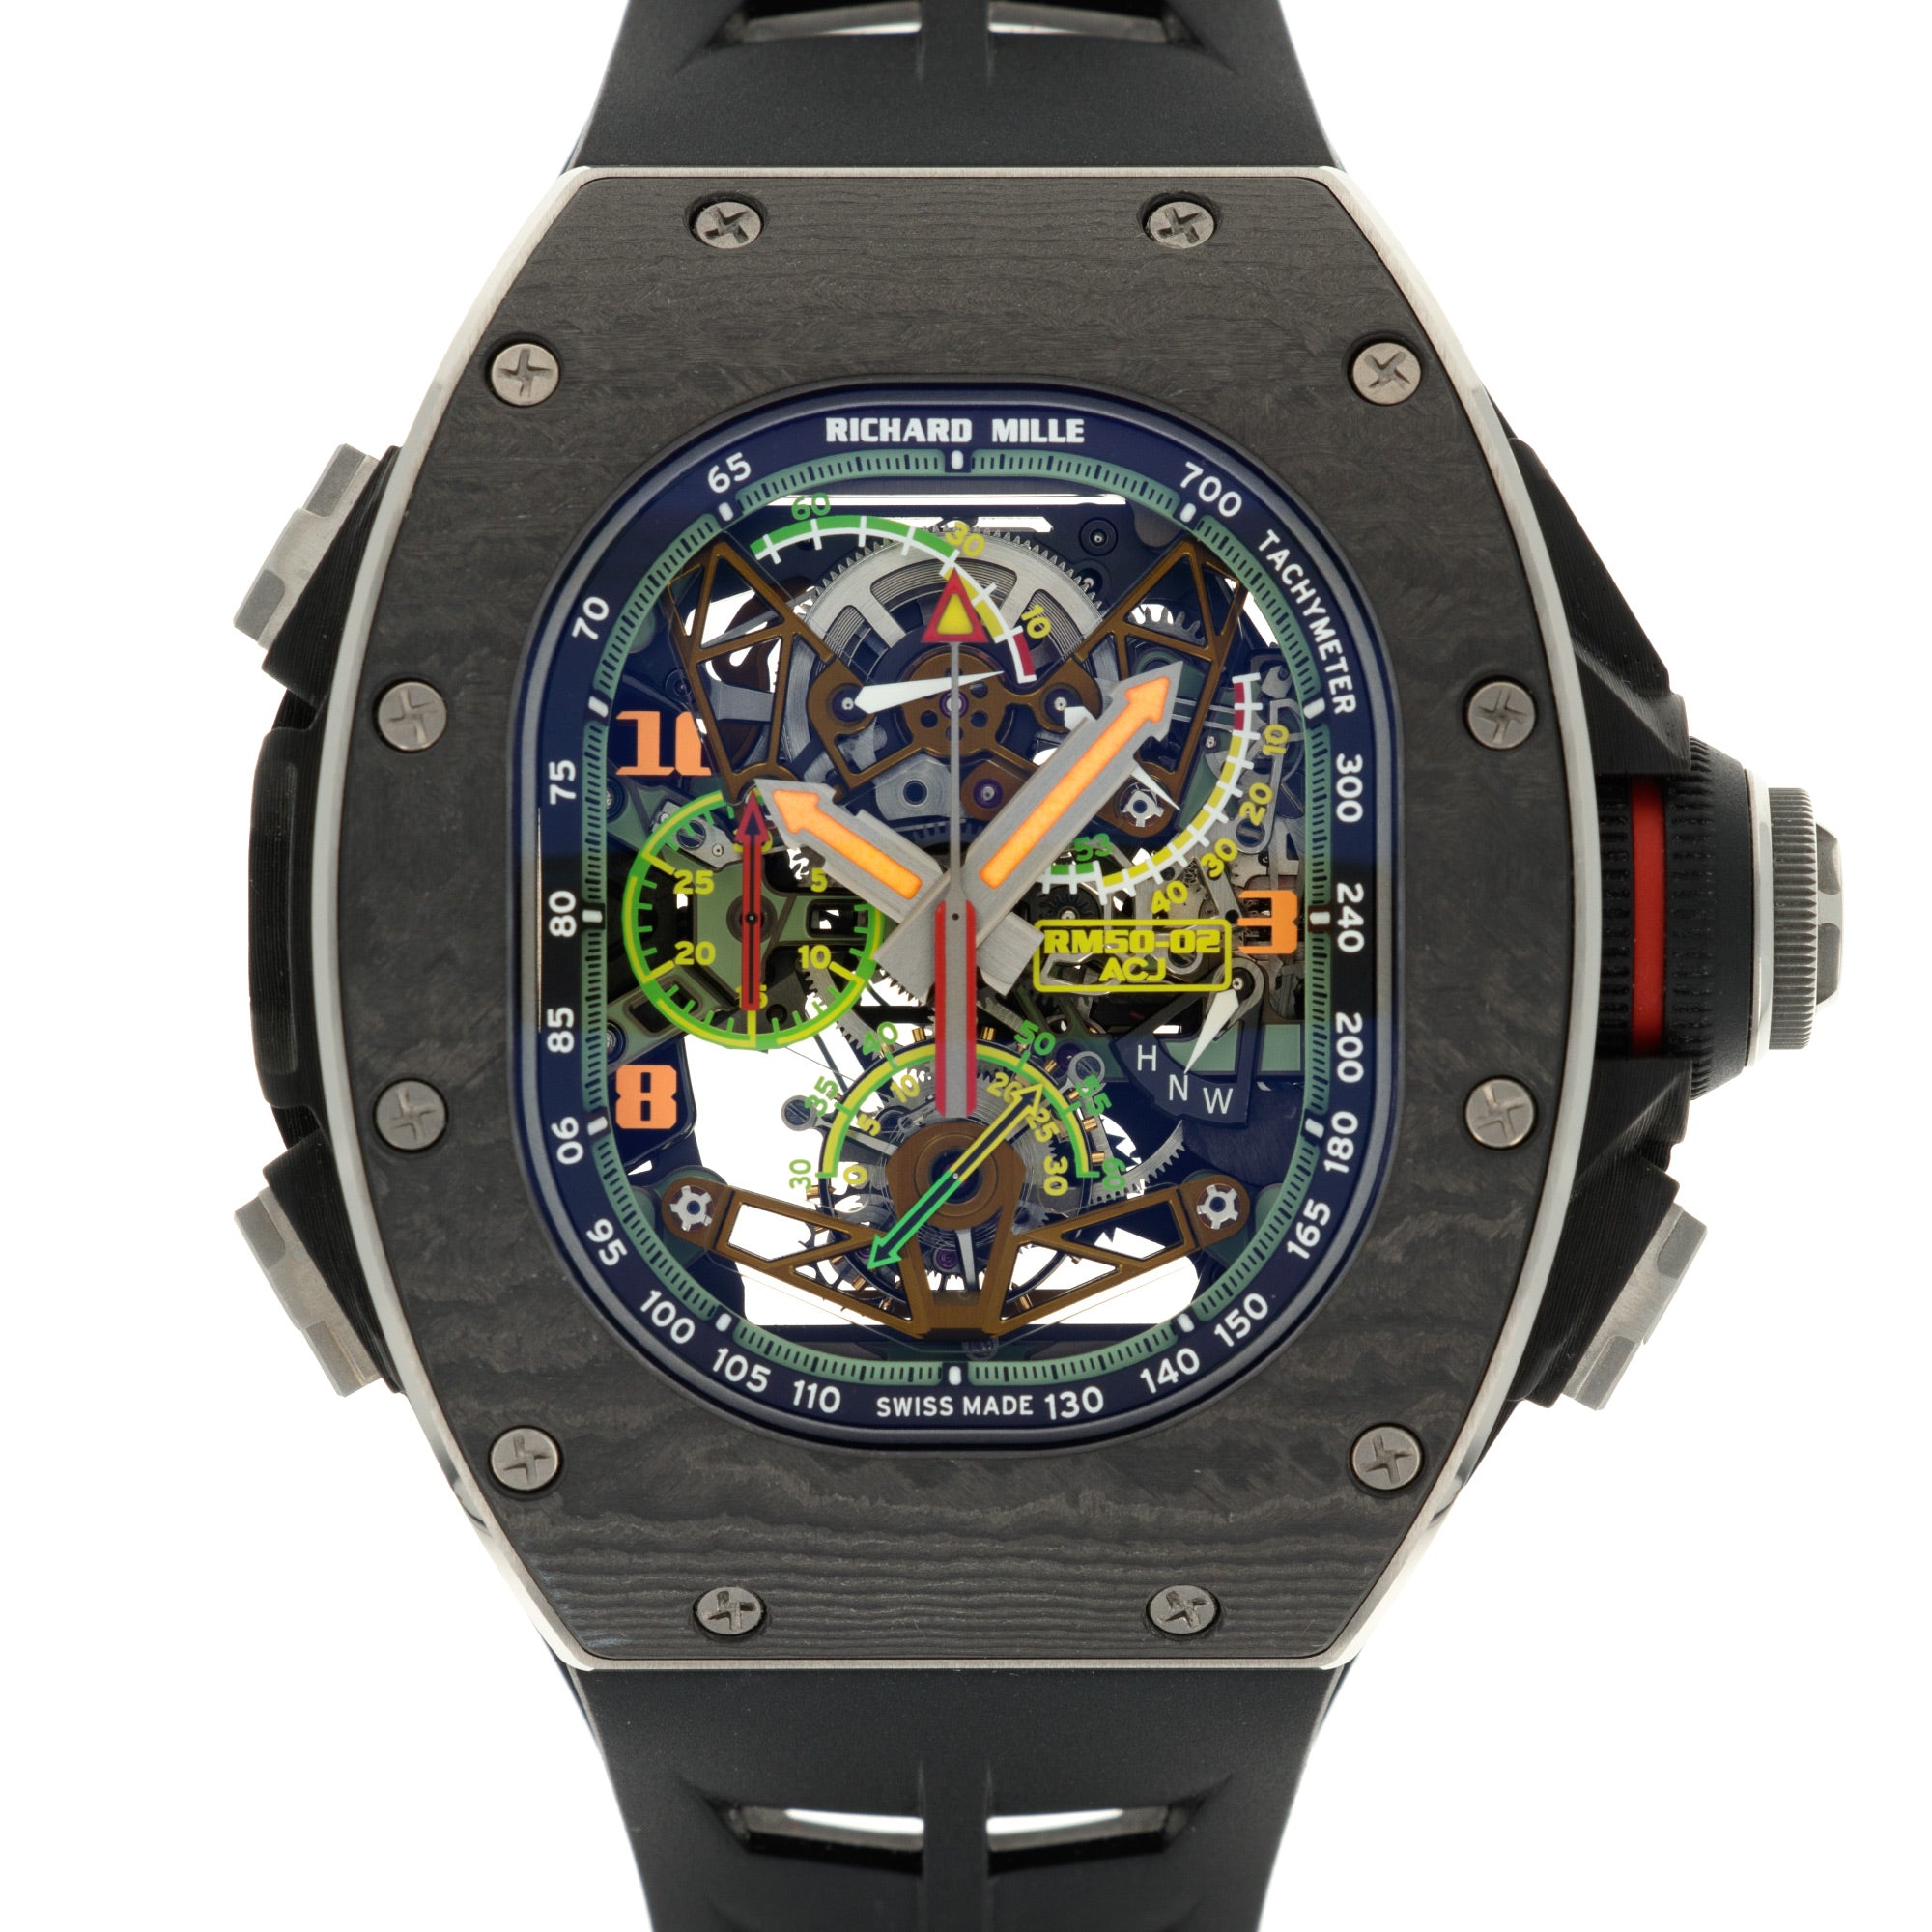 Richard Mille - Richard Mille RM50-02 Airbus II, Limited to 10 - The Keystone Watches